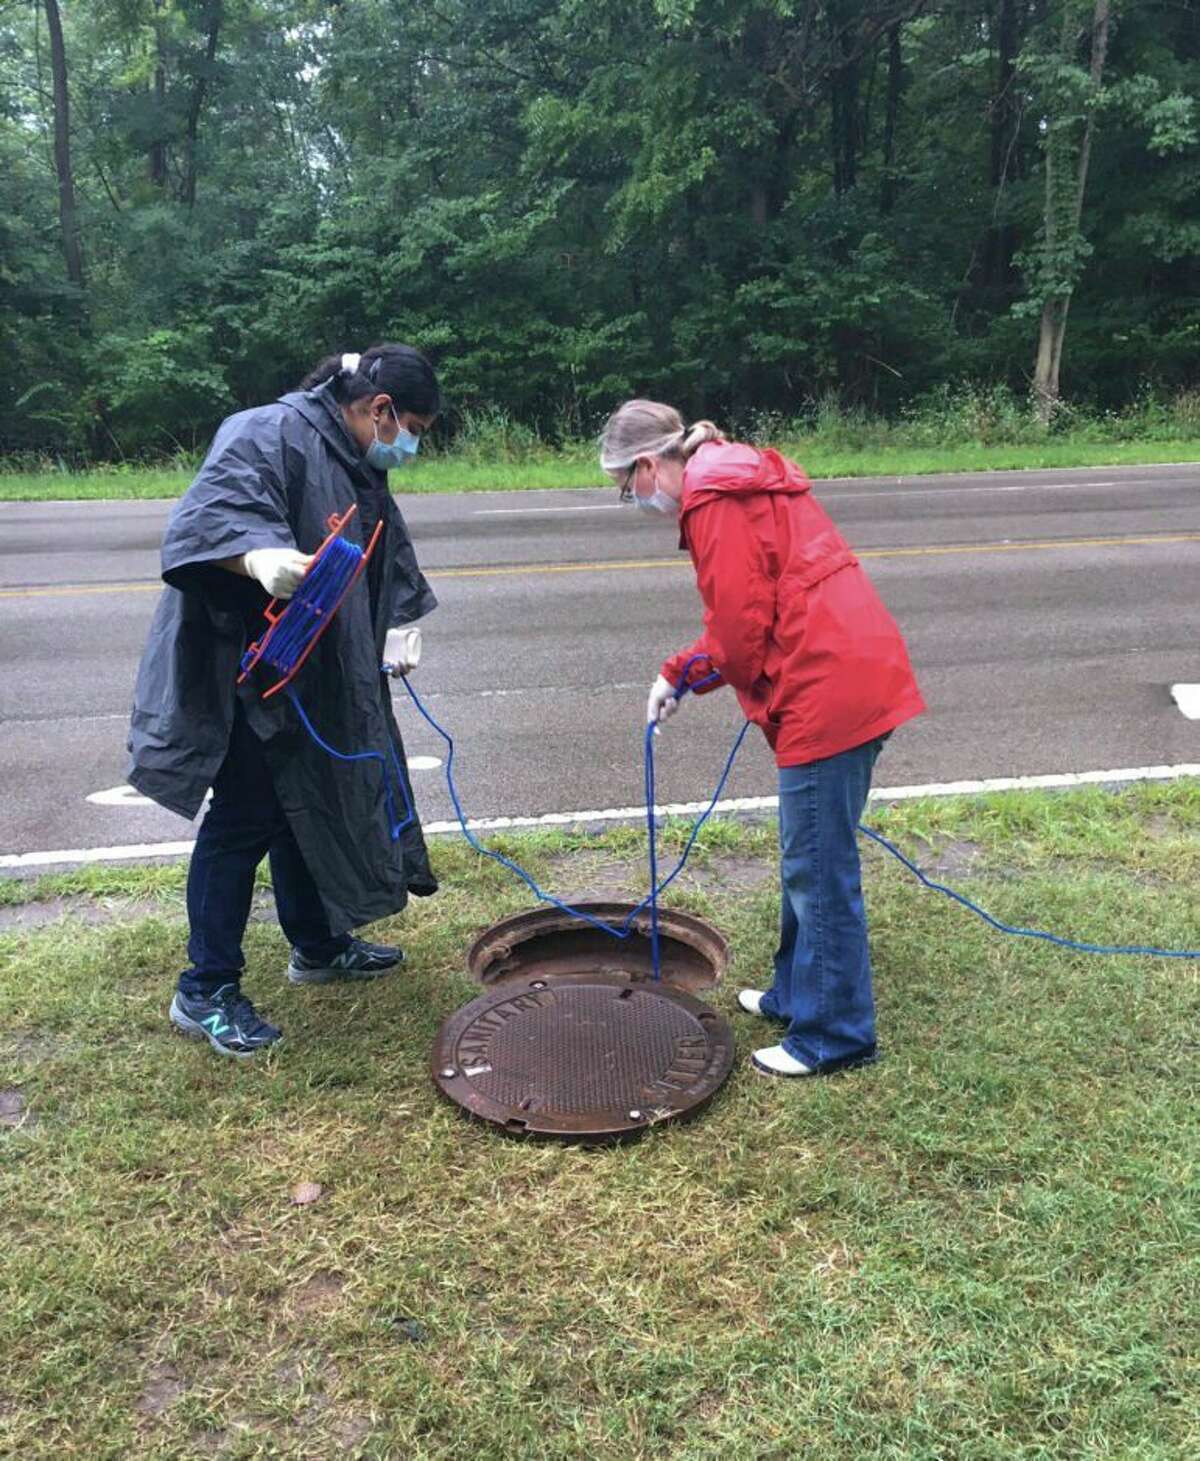 Researchers Becca Ives and Nishita D'Souza lower a container into a manhole to sample wastewater at Michigan State University. (Capital News Service photo)